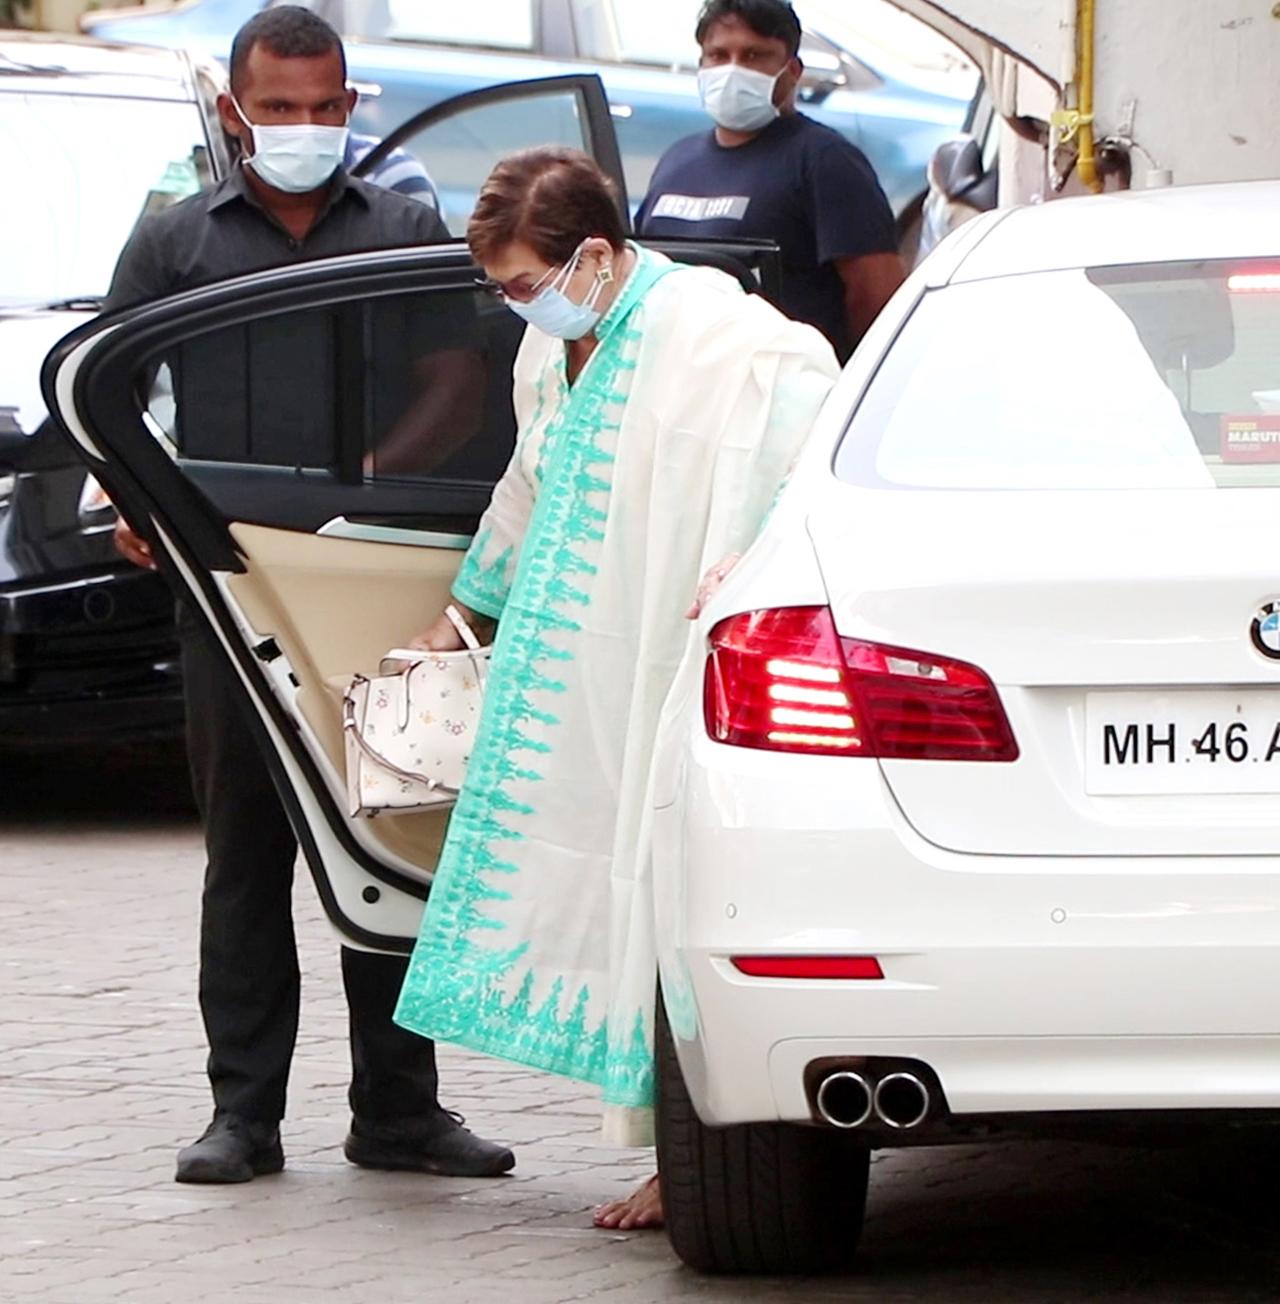 Salim Khan's wife-actress Helen was also spotted outside Salman Khan's residence, as she arrived for the Eid celebrations. Helen opted for a white and blue traditional outfit for the festive day.